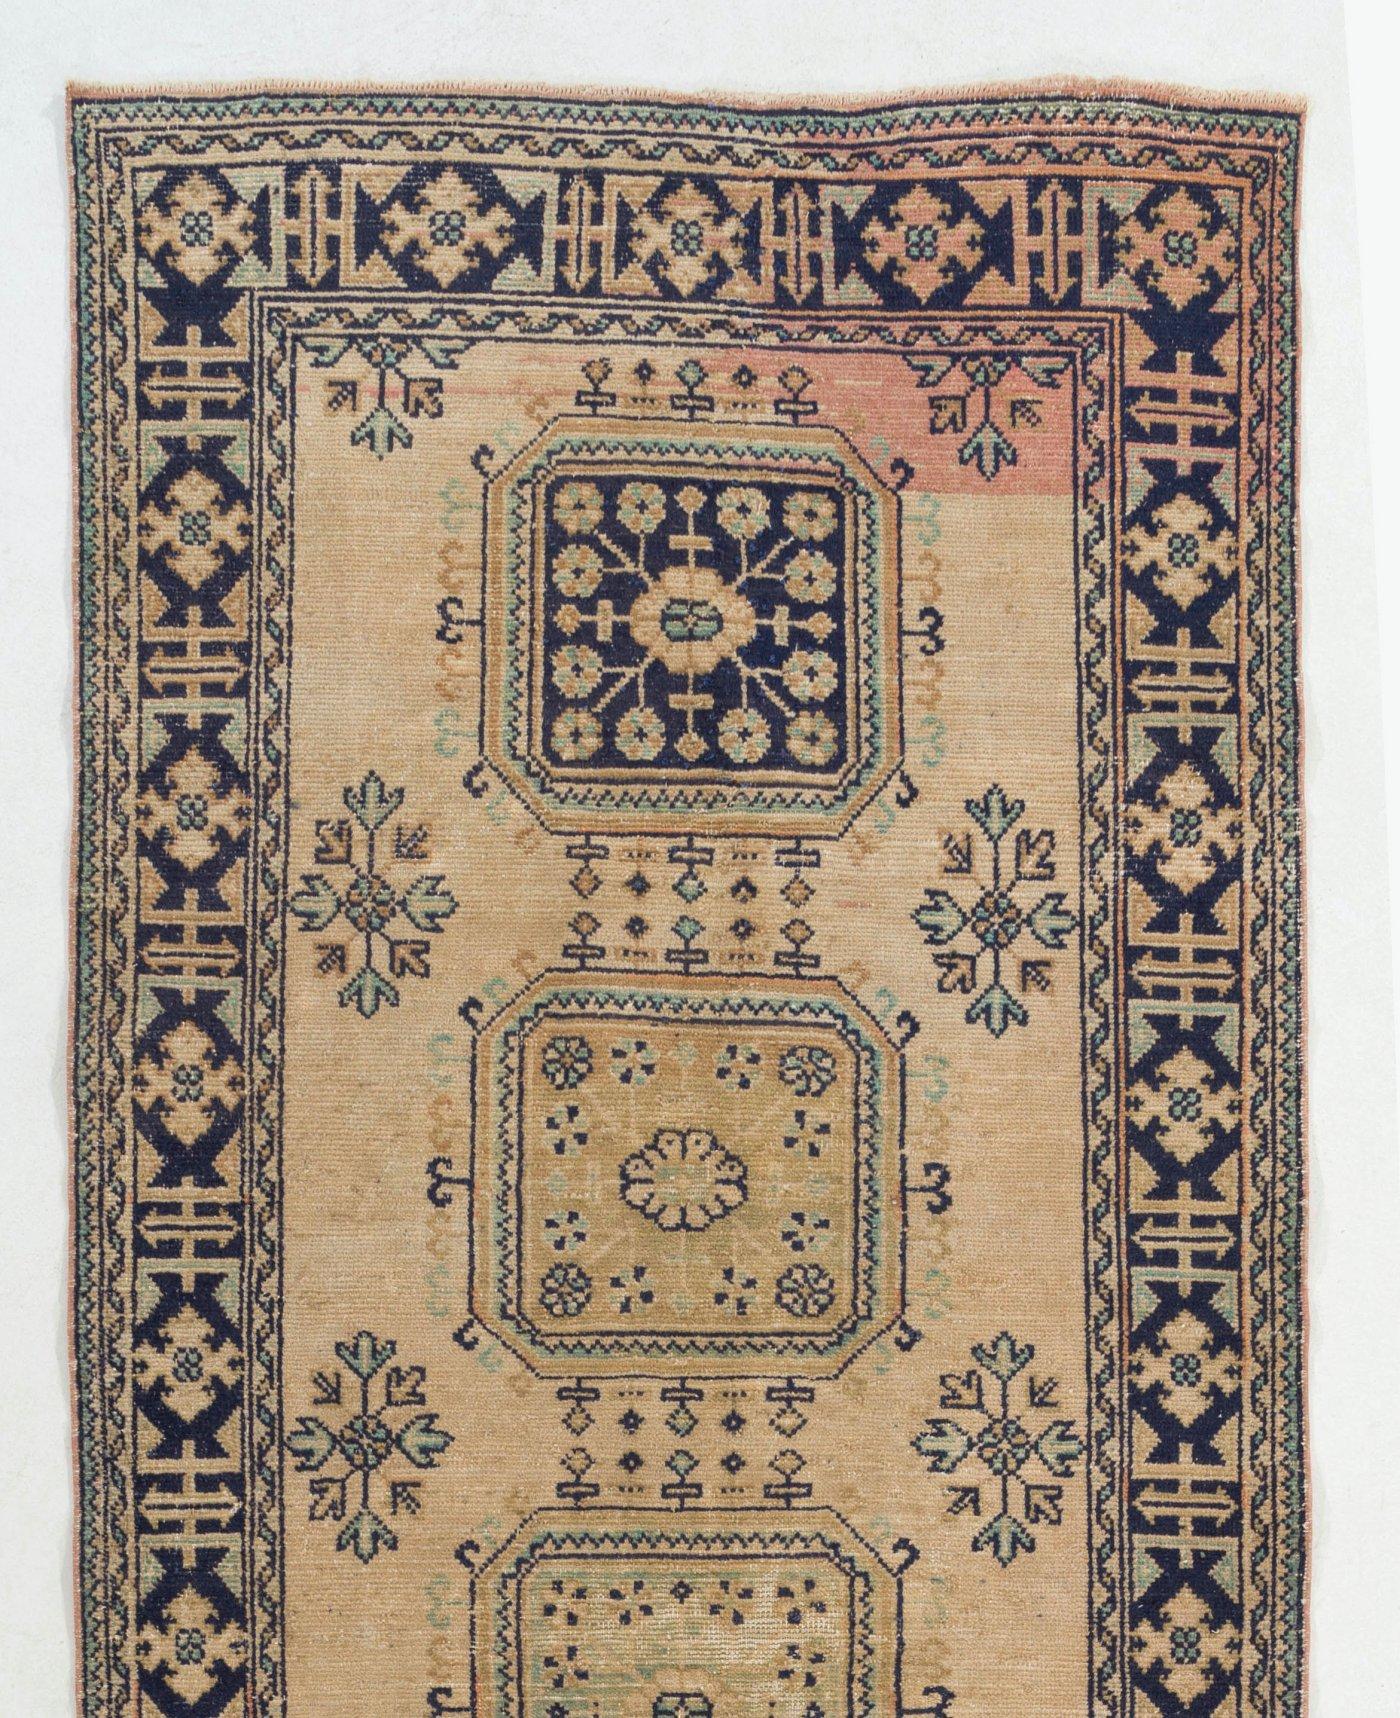 A gorgeous vintage Turkish runner rug for hallway decor. It was hand-knotted in the 1960s with low wool on cotton foundation and features a multiple medallion design. It is in very good condition, professionally-washed, sturdy and suitable for areas